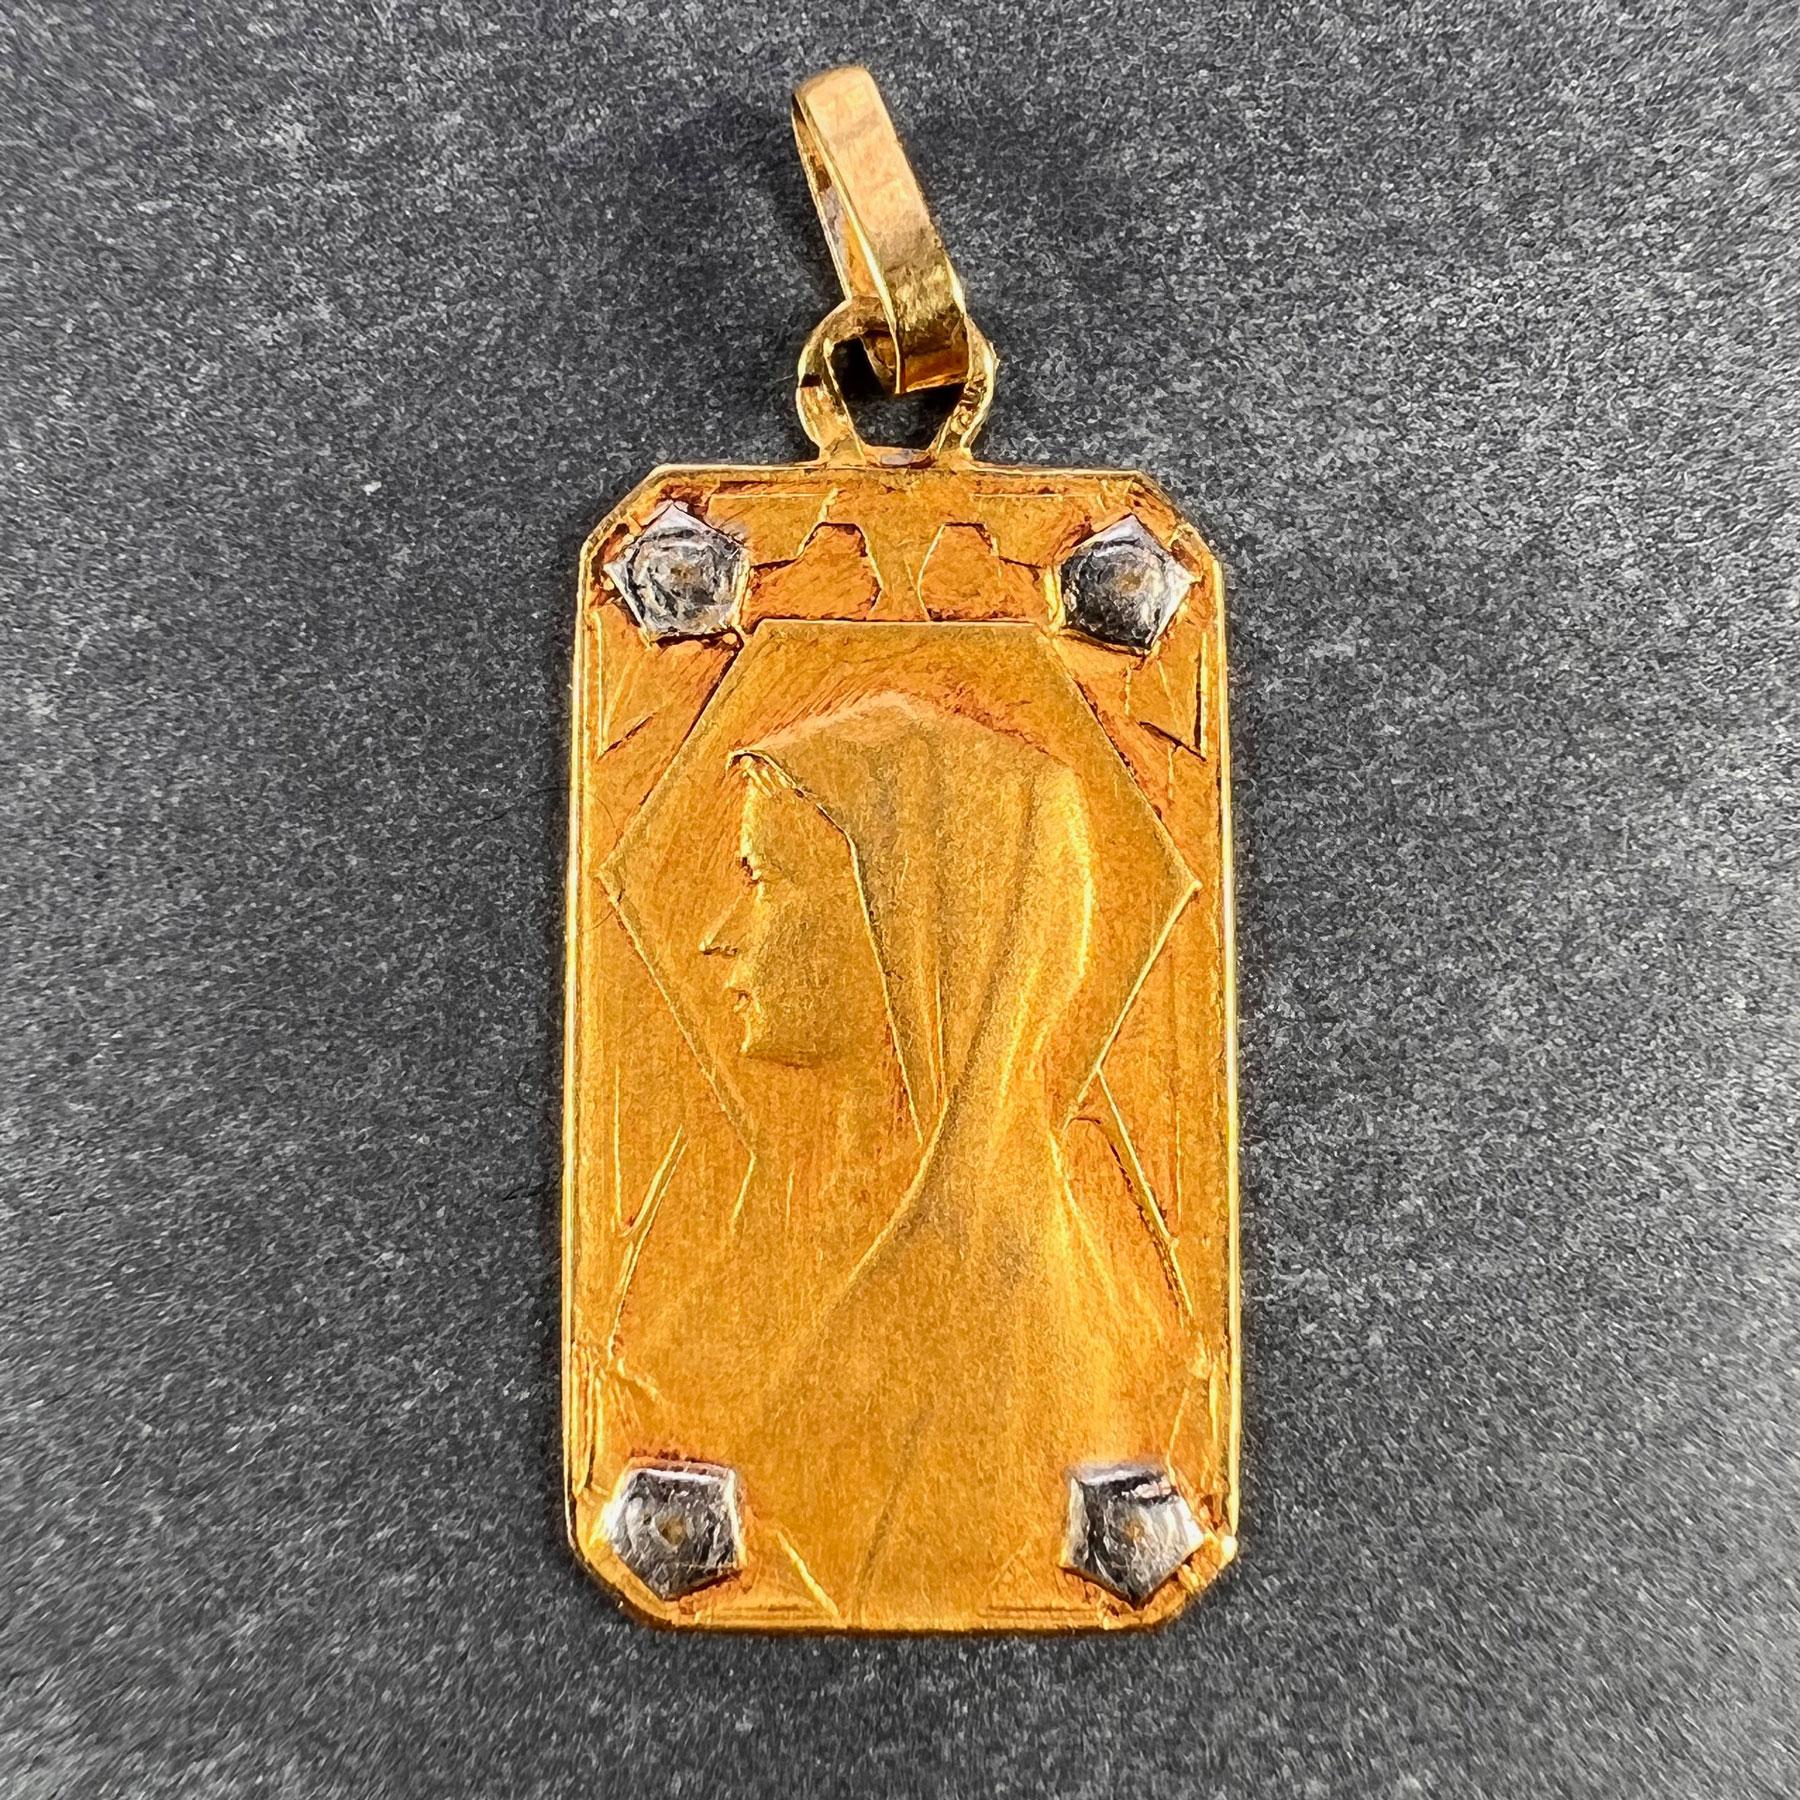 A French 18 karat (18K) yellow gold charm pendant designed as a rectangular medal depicting the Virgin Mary with white gold rosettes to each corner. Stamped with the eagle mark for 18 karat gold and French manufacture with an unknown maker's mark. 